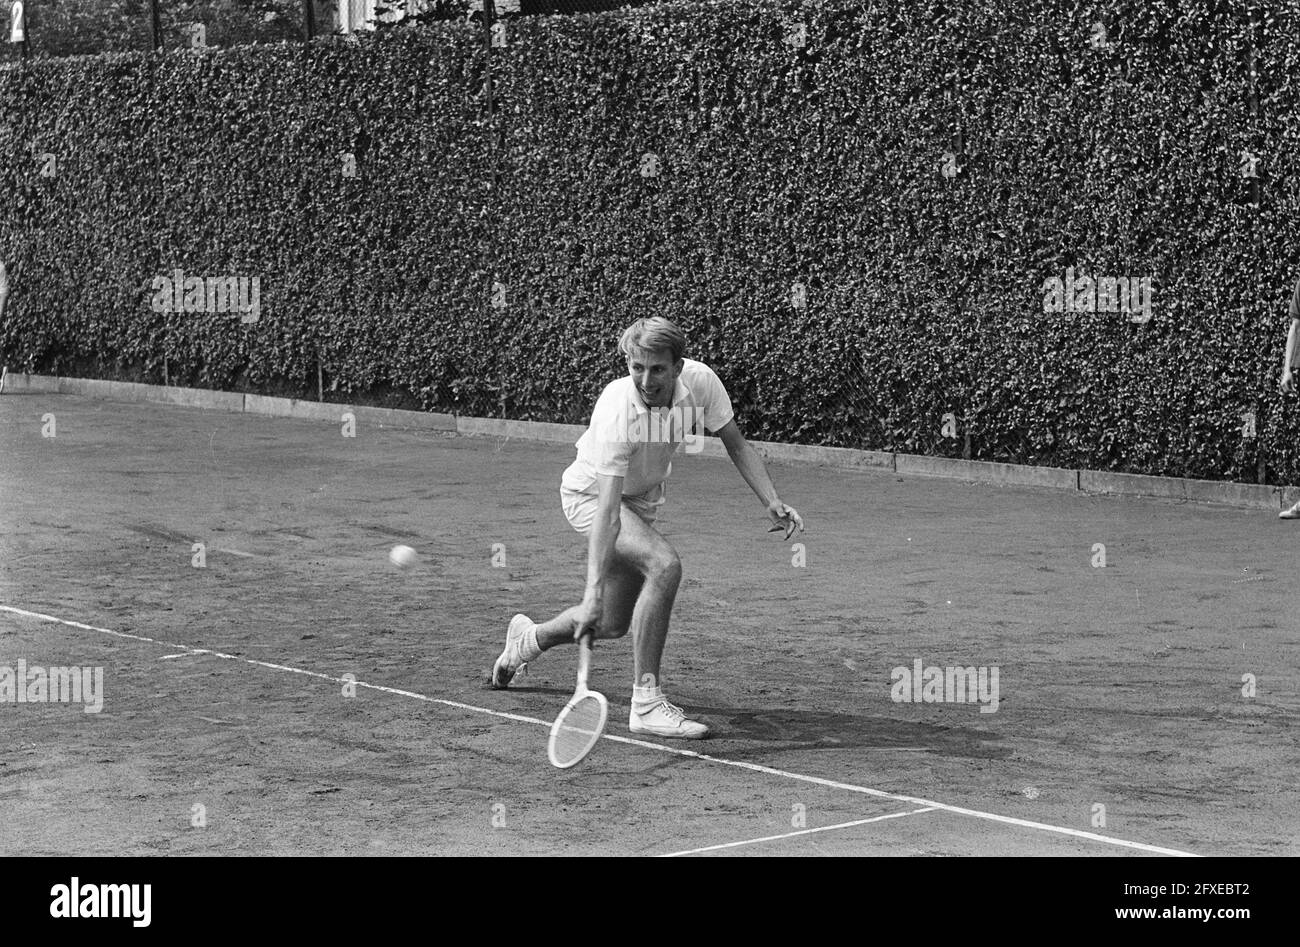 Tennis tournament in Hilversum, the Dutchman Evert Schneid in action, July 19, 1965, tennis, tournaments, The Netherlands, 20th century press agency photo, news to remember, documentary, historic photography 1945-1990, visual stories, human history of the Twentieth Century, capturing moments in time Stock Photo